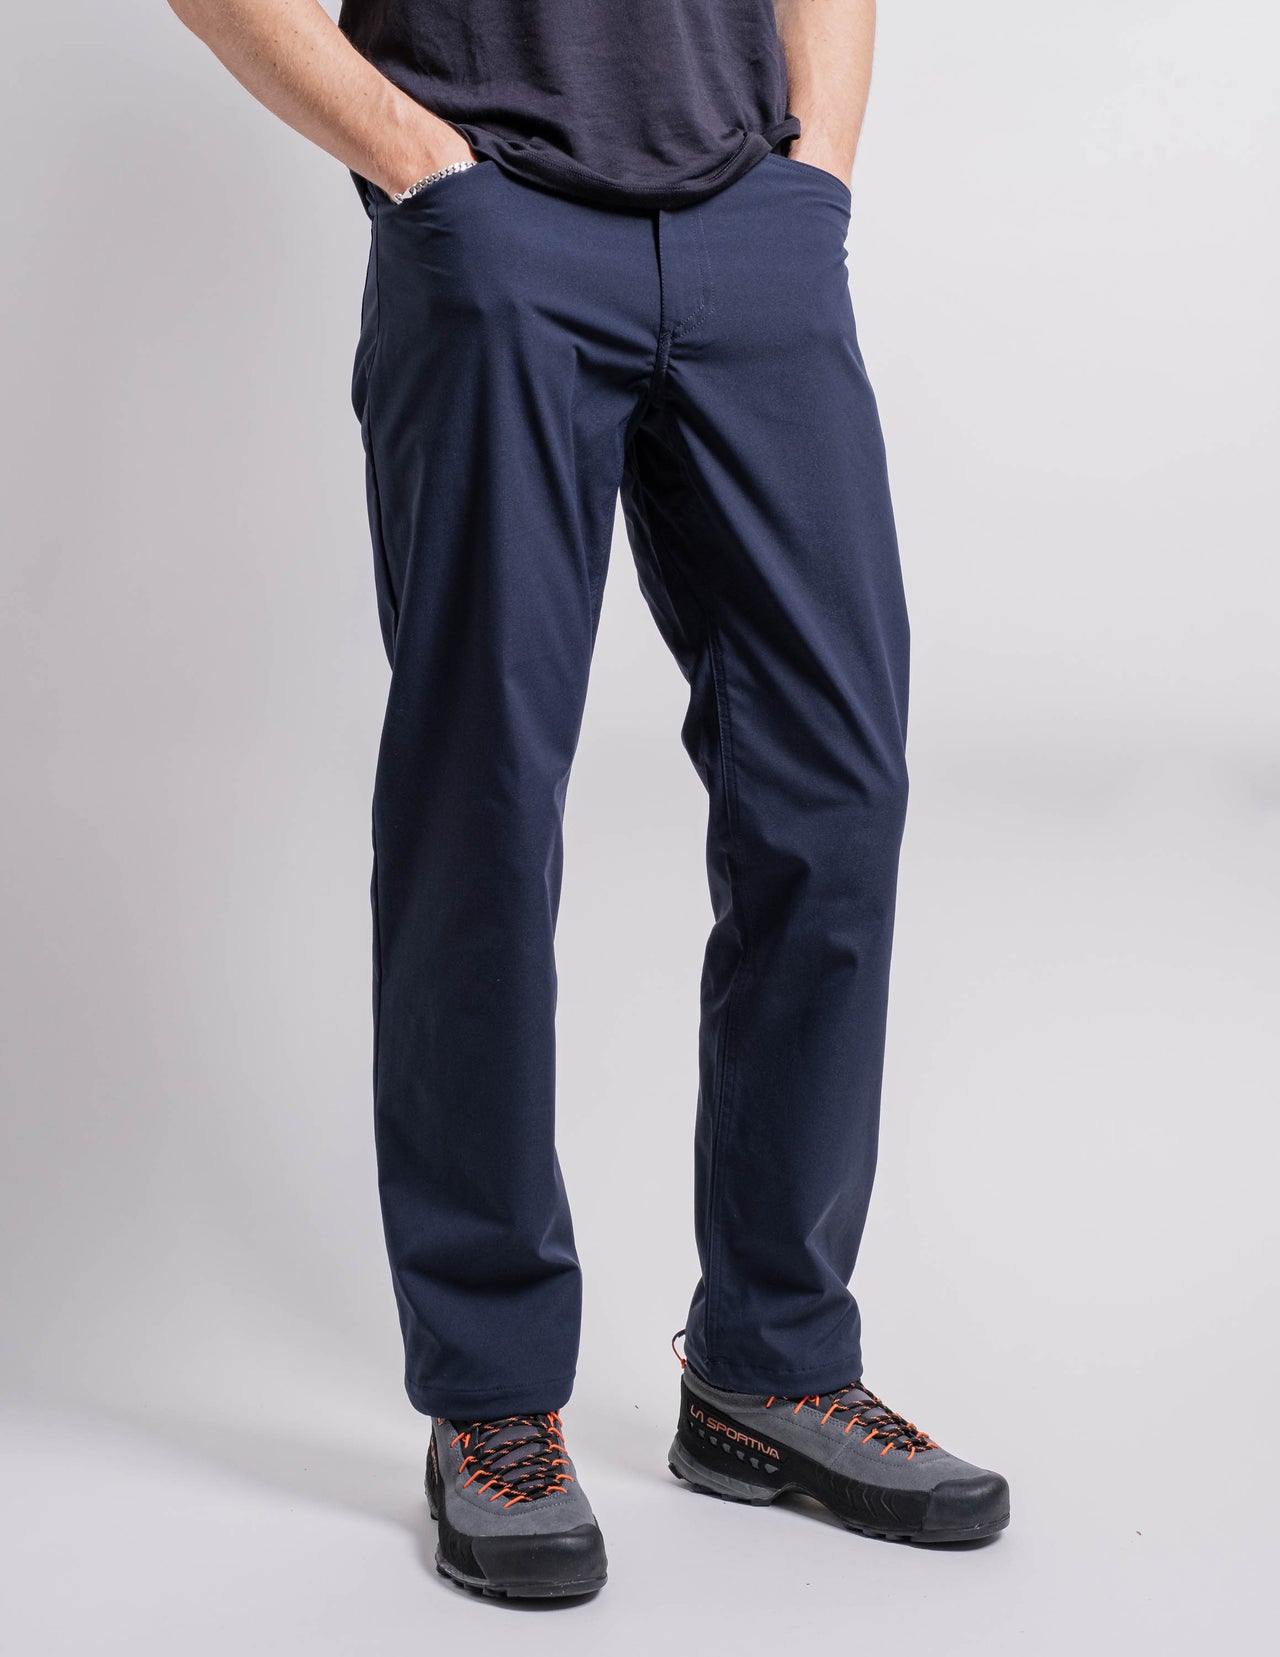 Dock Pants in Blue Illusion